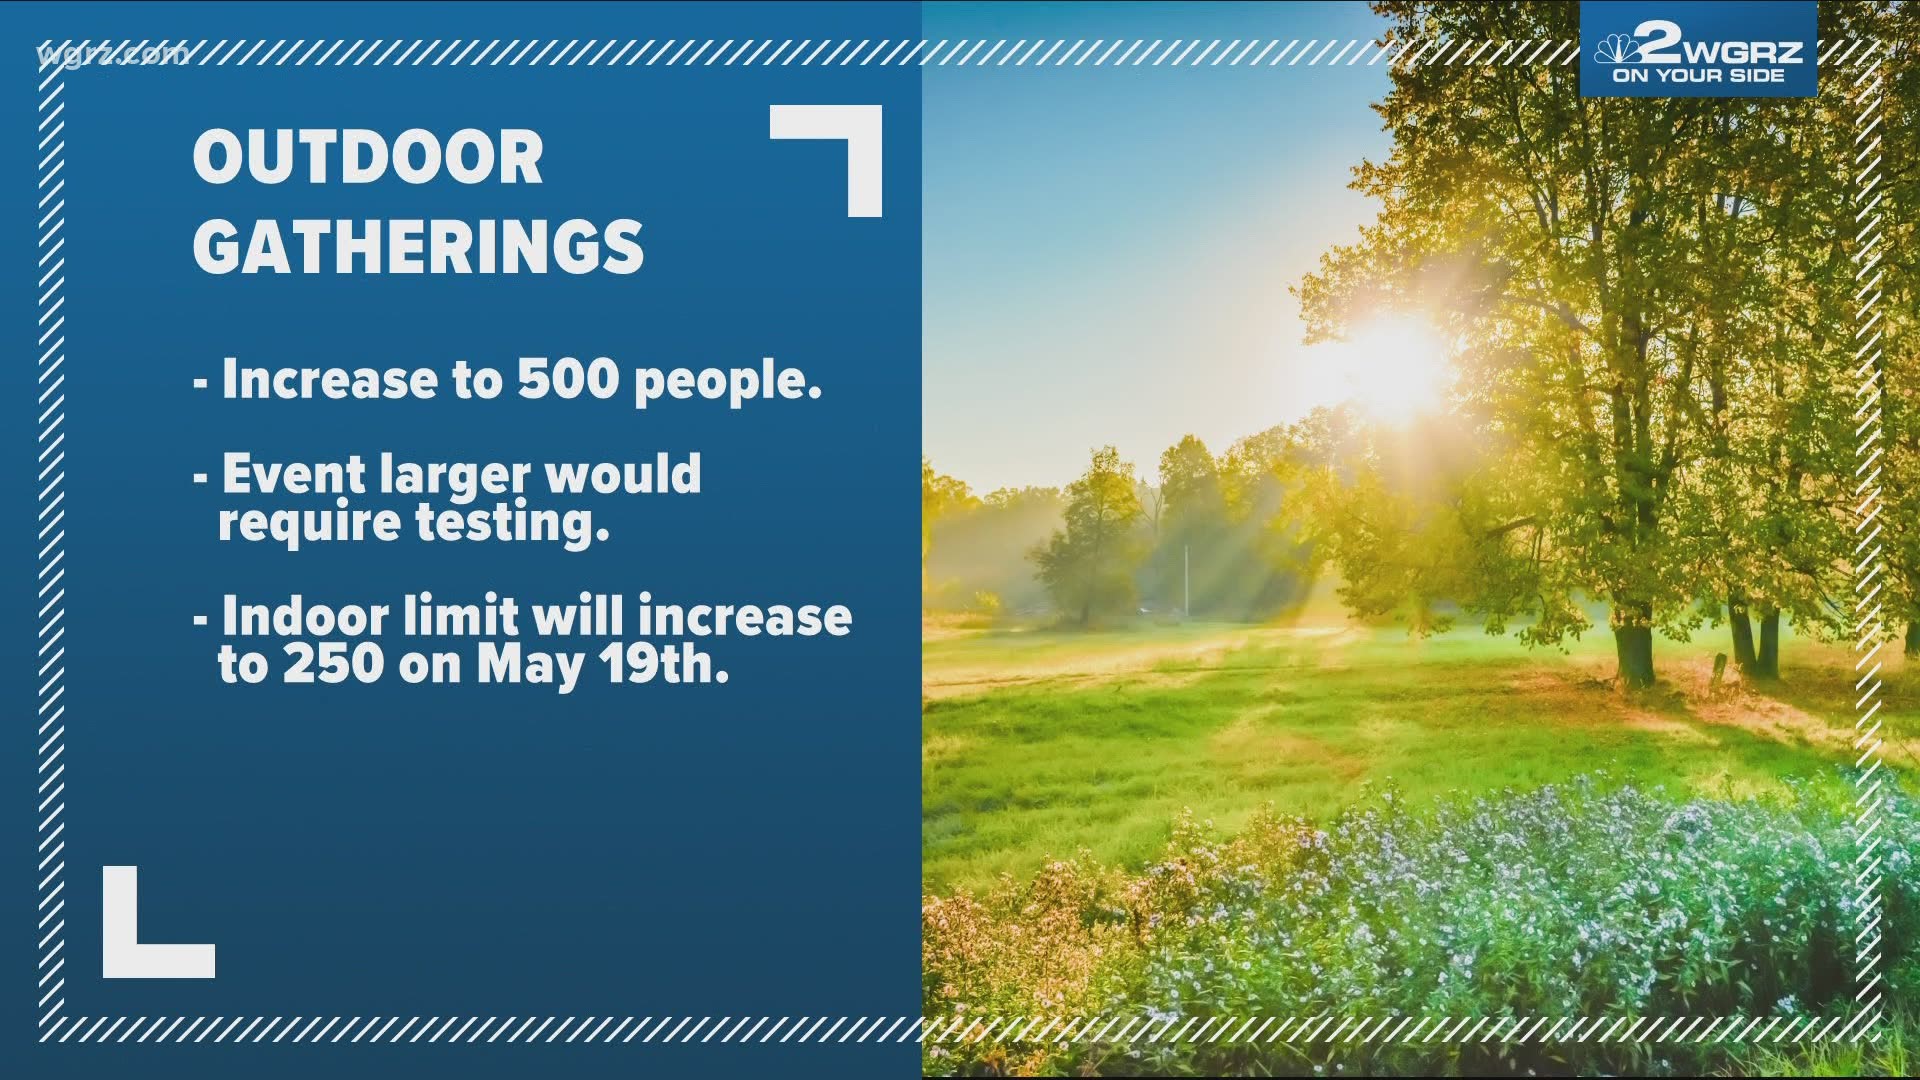 New York's limit for outdoor gatherings will increase to 500 people. That means any event larger would require testing.